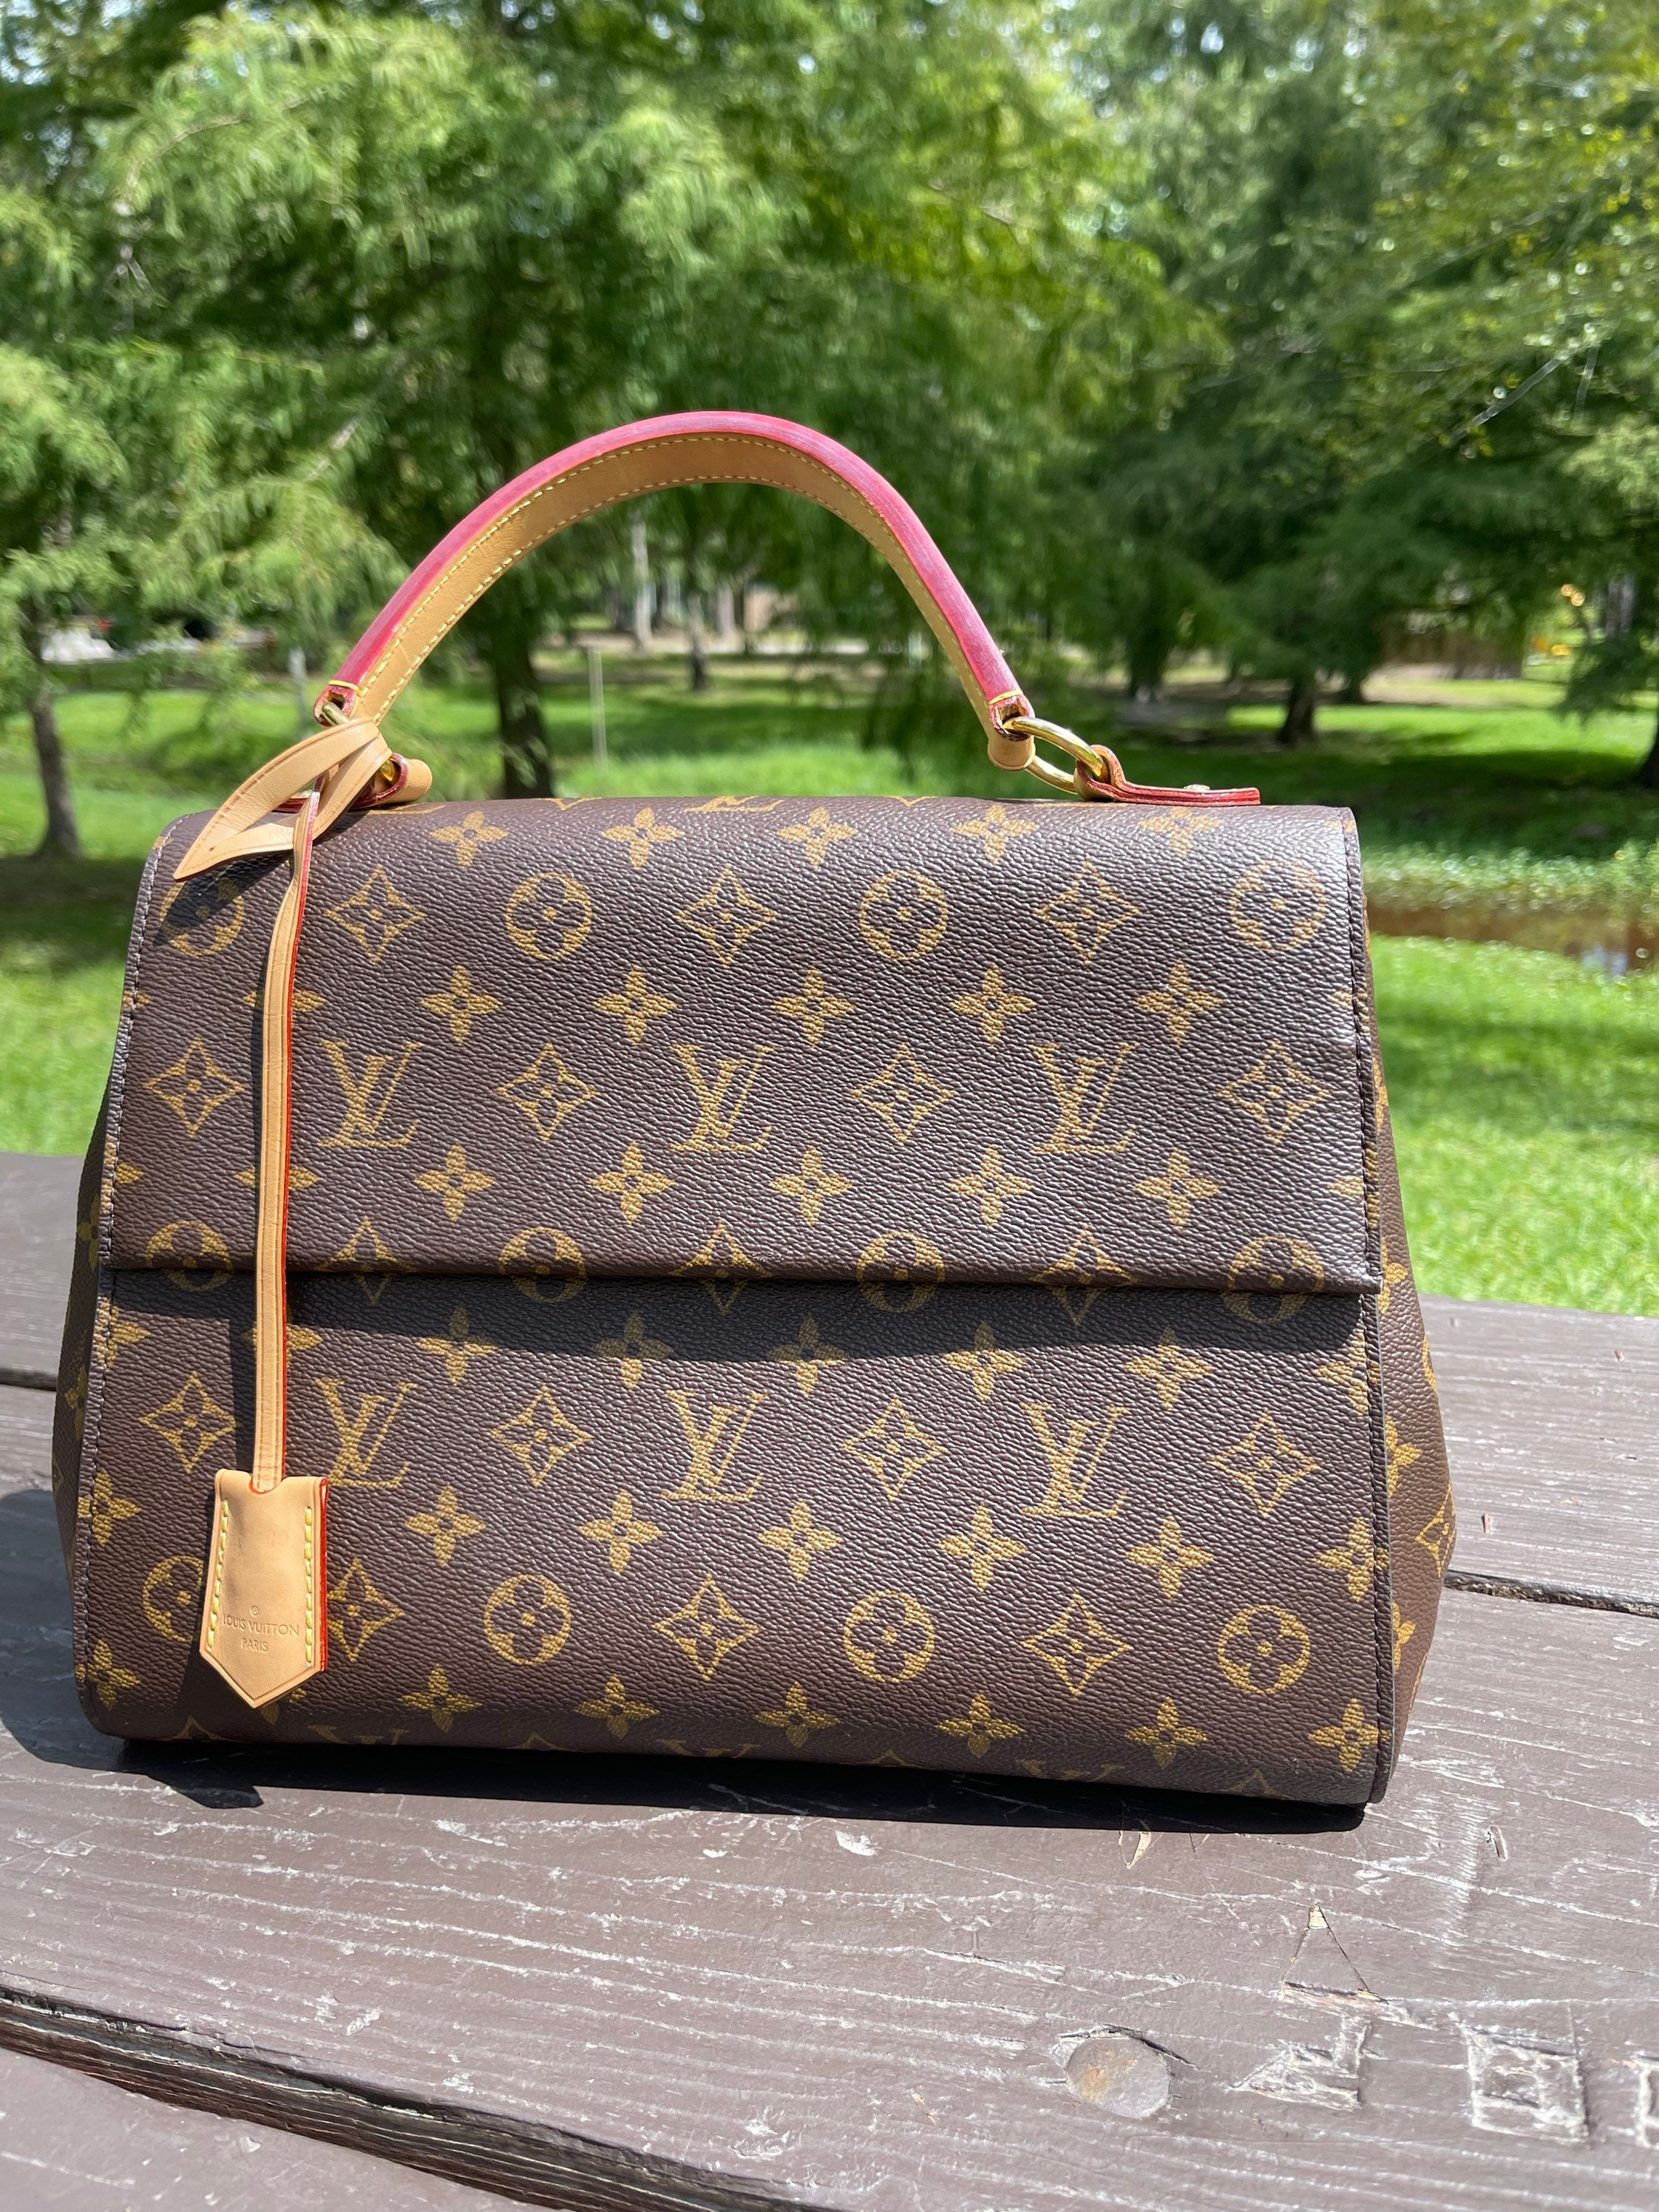 LV Ellipse Bag: Authentic & Discounted 199016/76